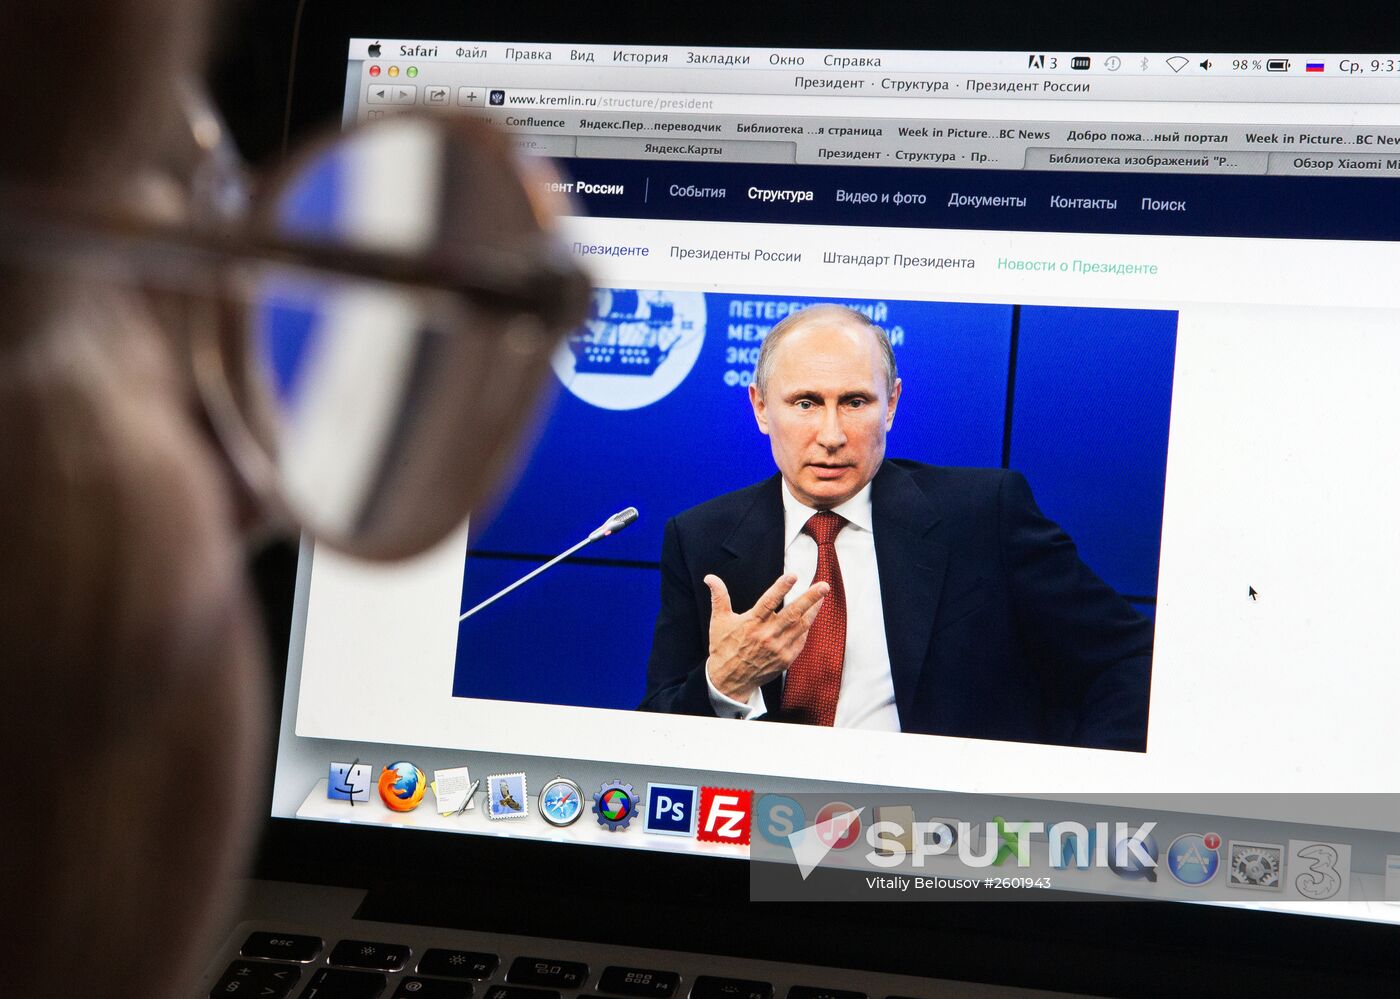 Launch of Russian President's new website version